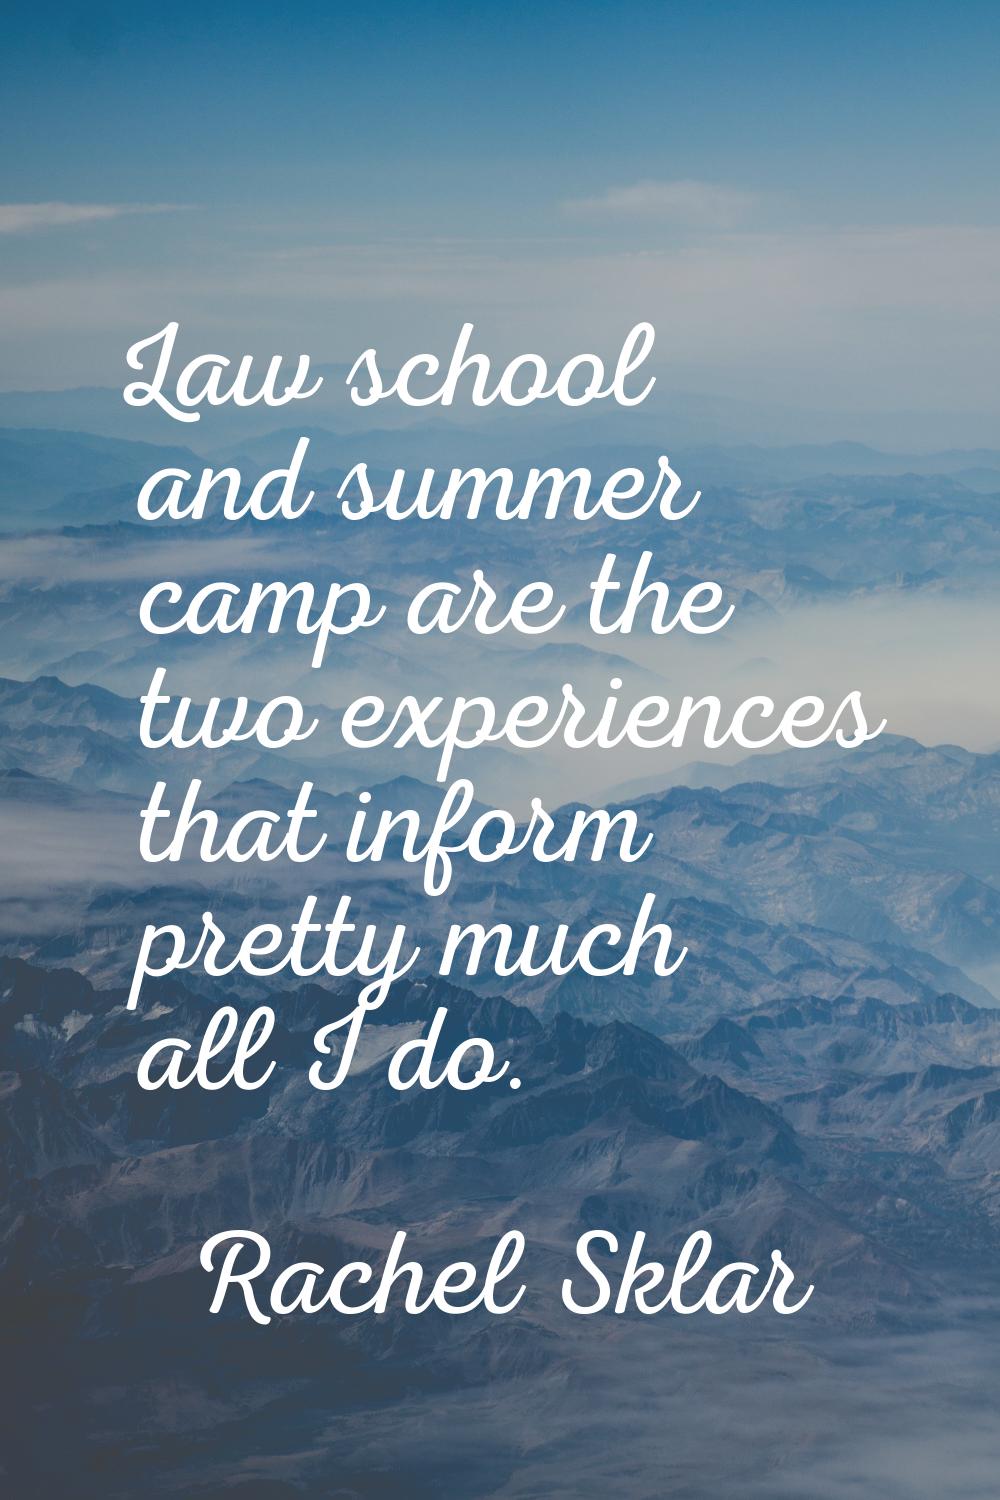 Law school and summer camp are the two experiences that inform pretty much all I do.